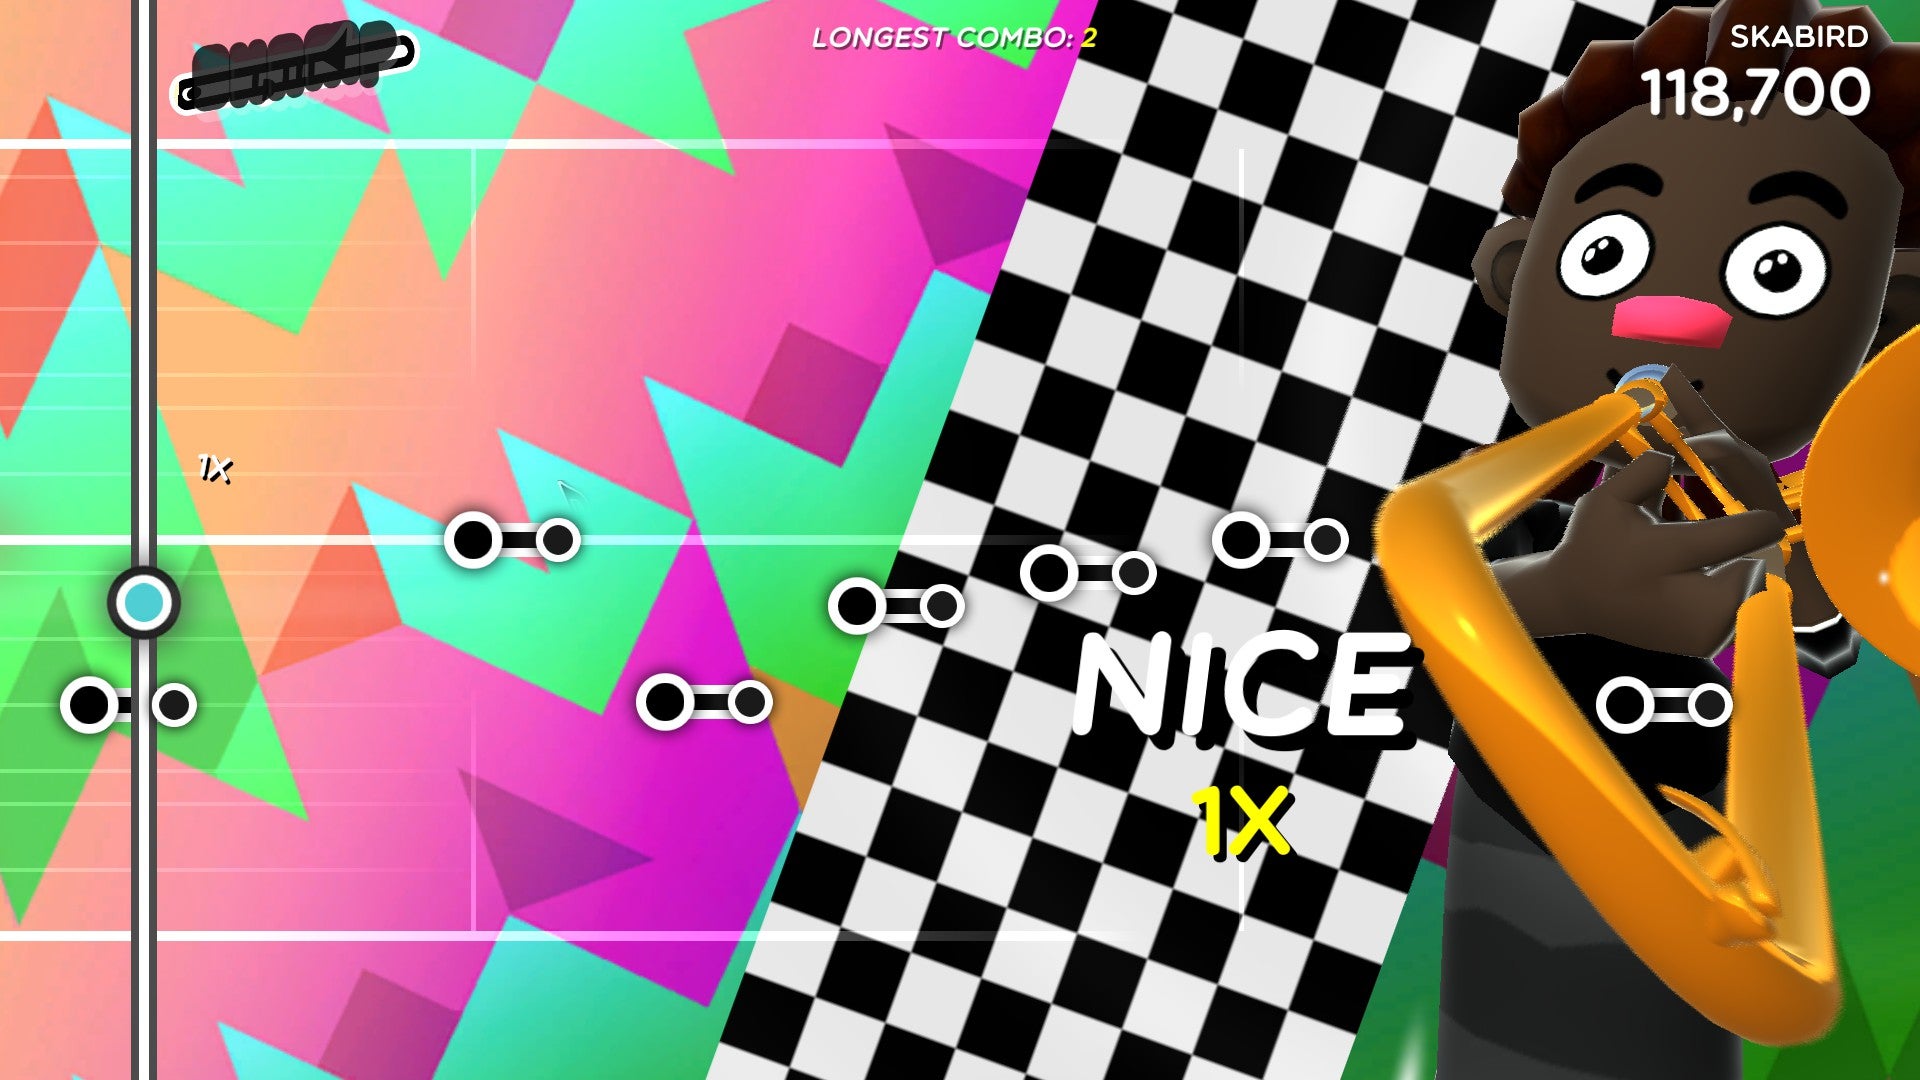 A cartoony man playing a trombone and facing the camera. It's a rhythm action game, so notes move around the screen like tadpoles. There is a jazzy background because the song plays skabird. It's all neon pink and green.